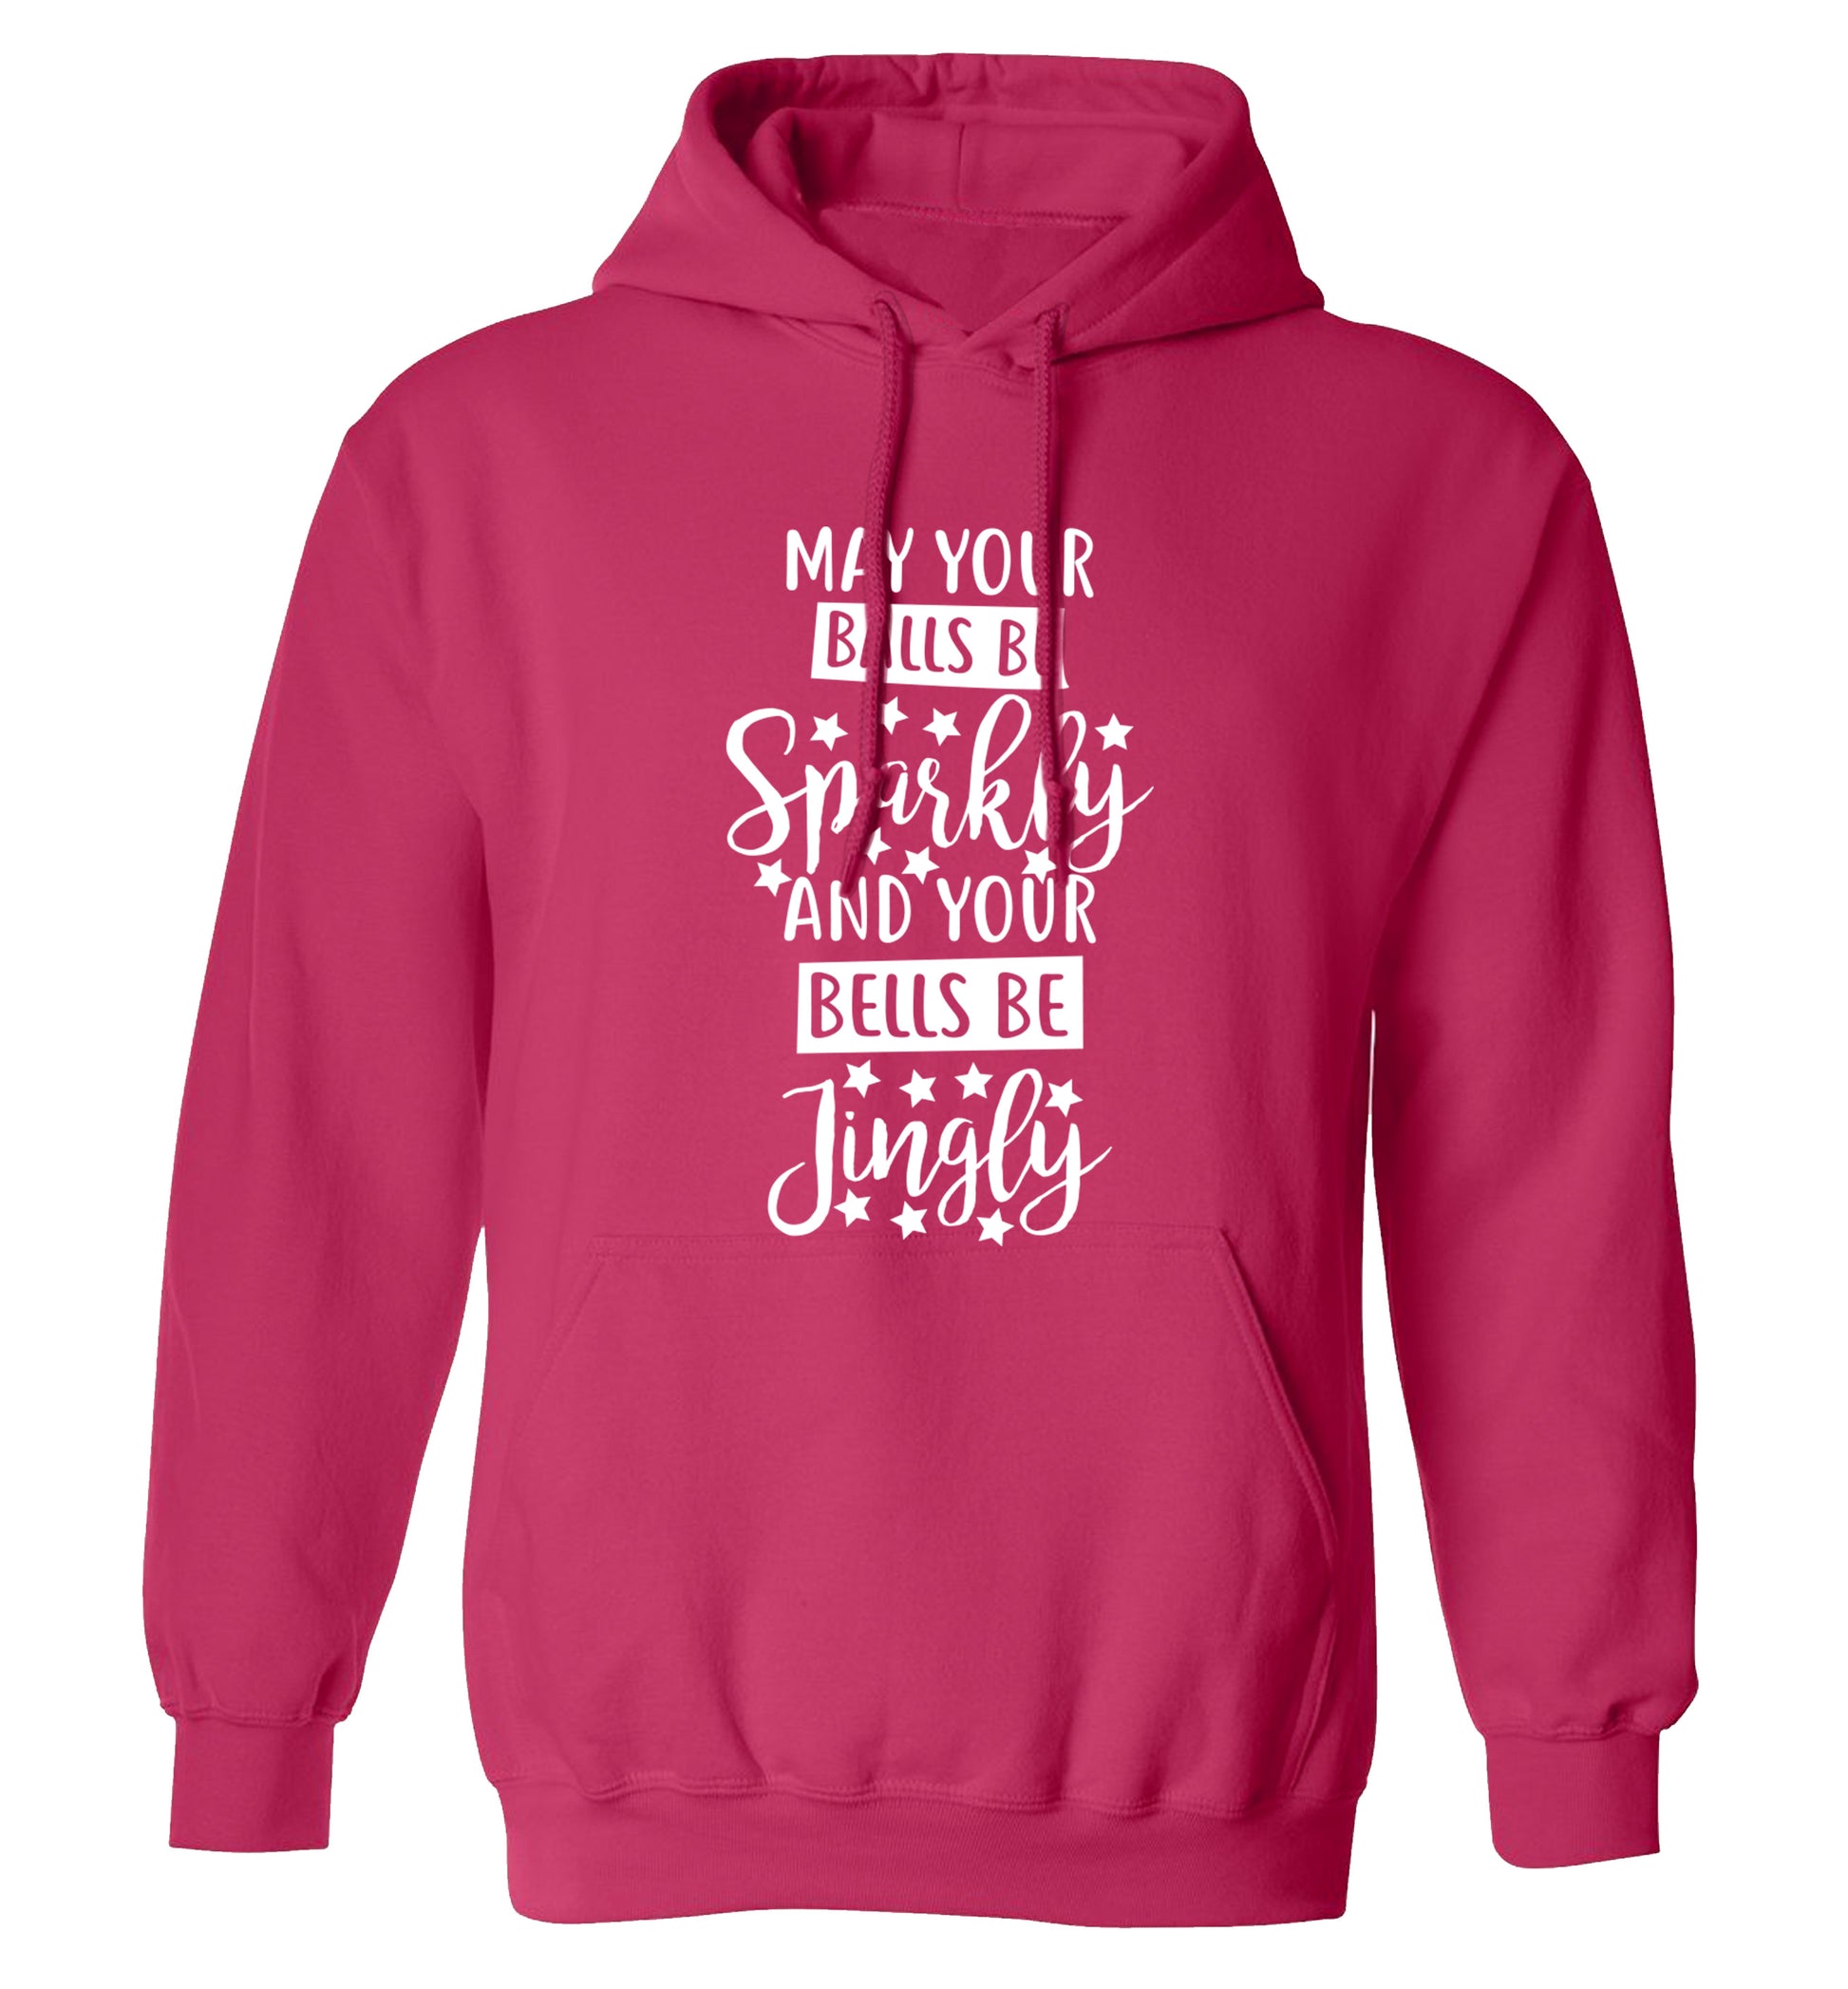 May your balls be sparkly and your bells be jingly adults unisex pink hoodie 2XL